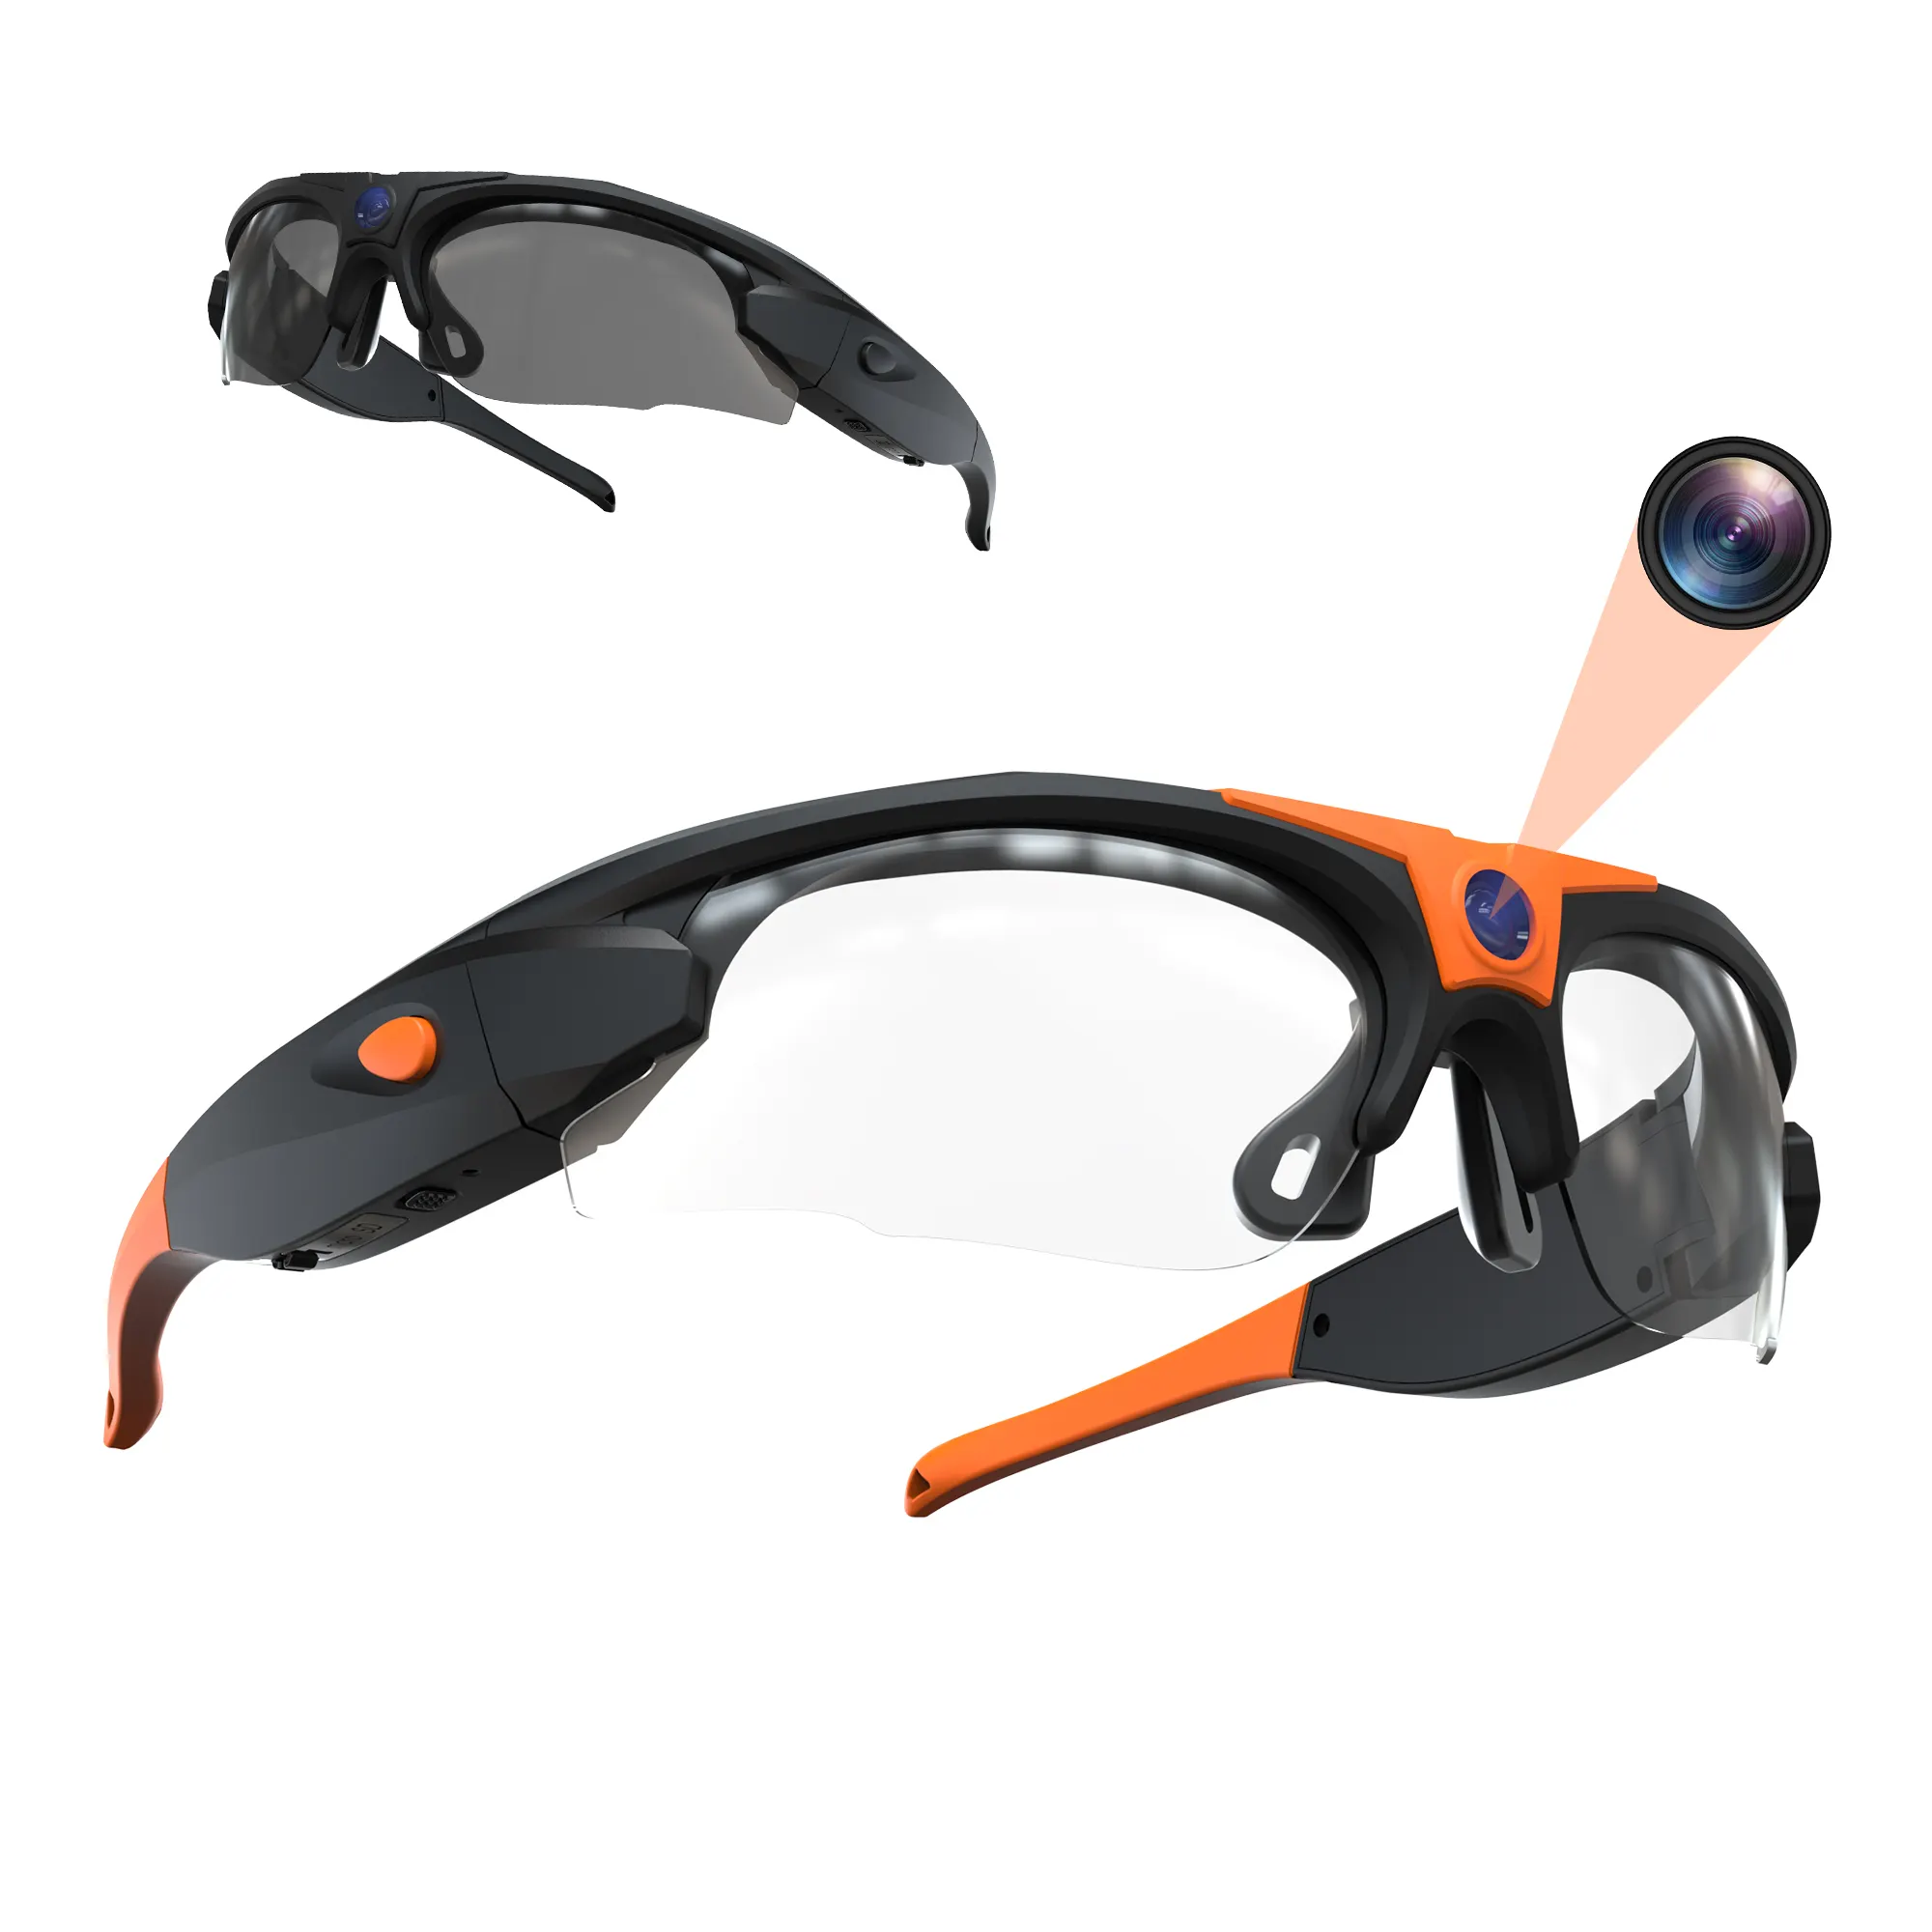 Sport DV HD Camera Sunglasses With Wifi BT Function Smart Video and Audio Play Camera Glasses Multi Use Mode